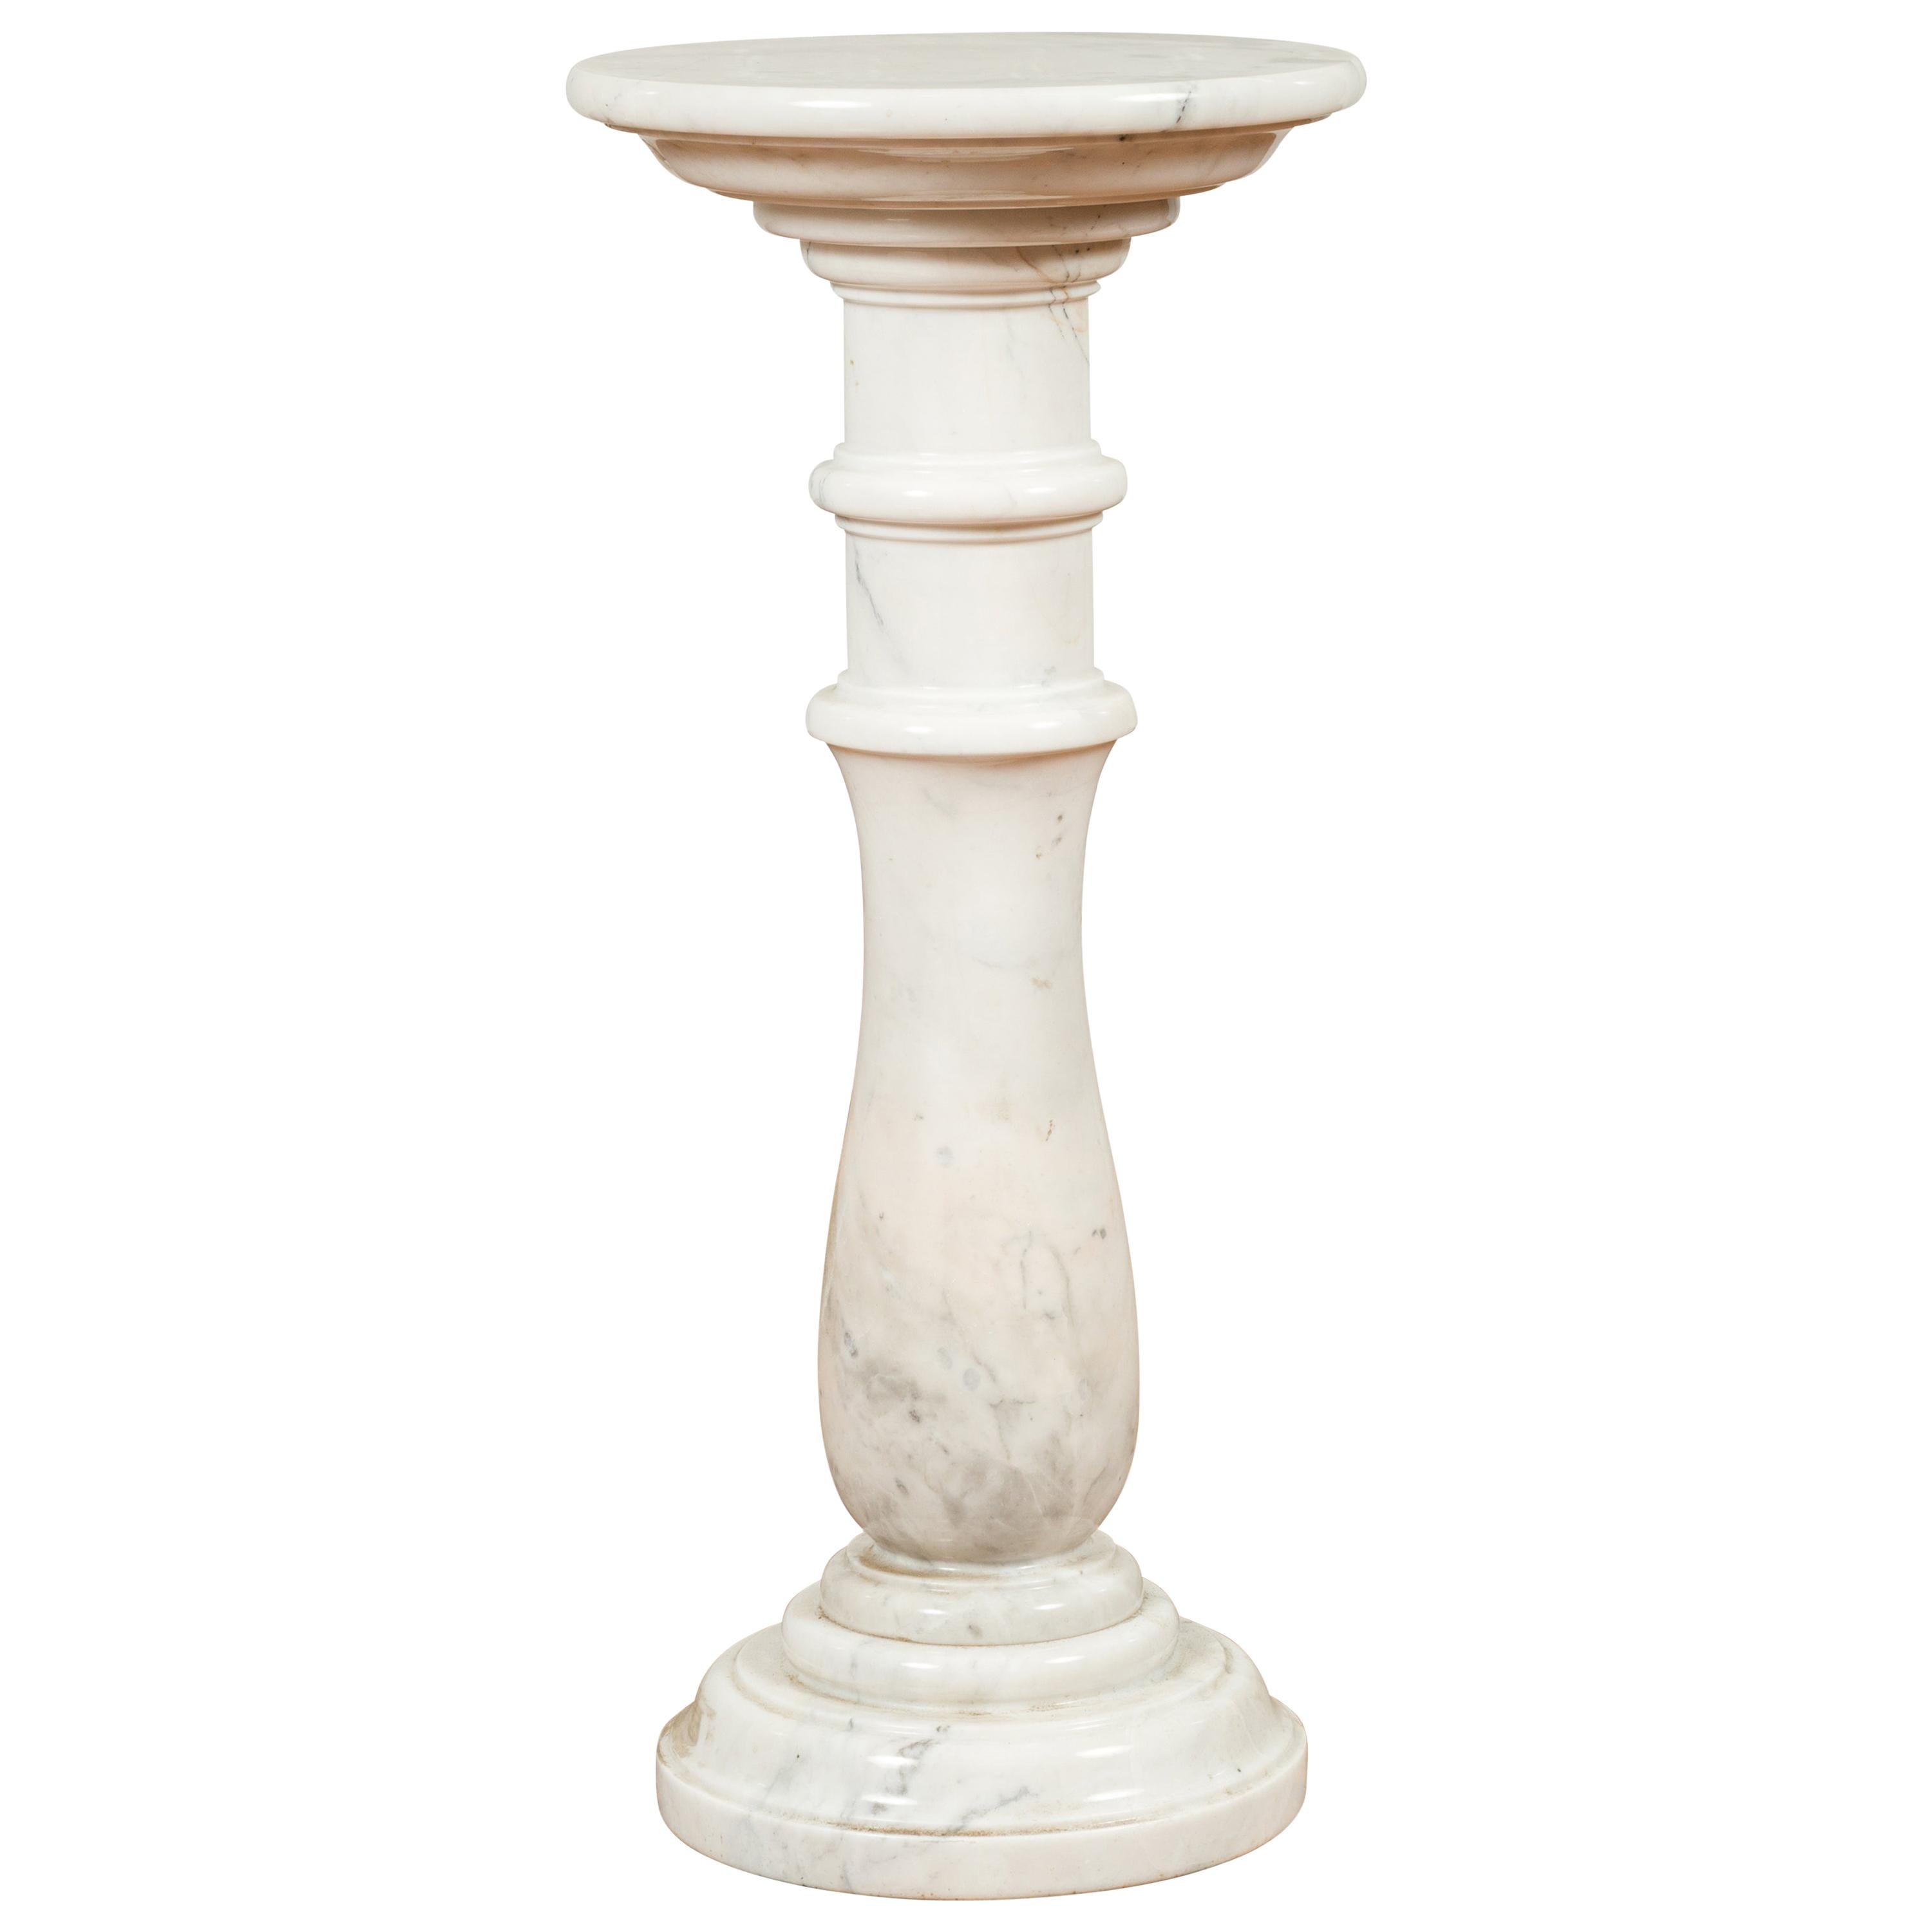 Contemporary Indian White Marble Pedestal with Baluster Base and Circular Top